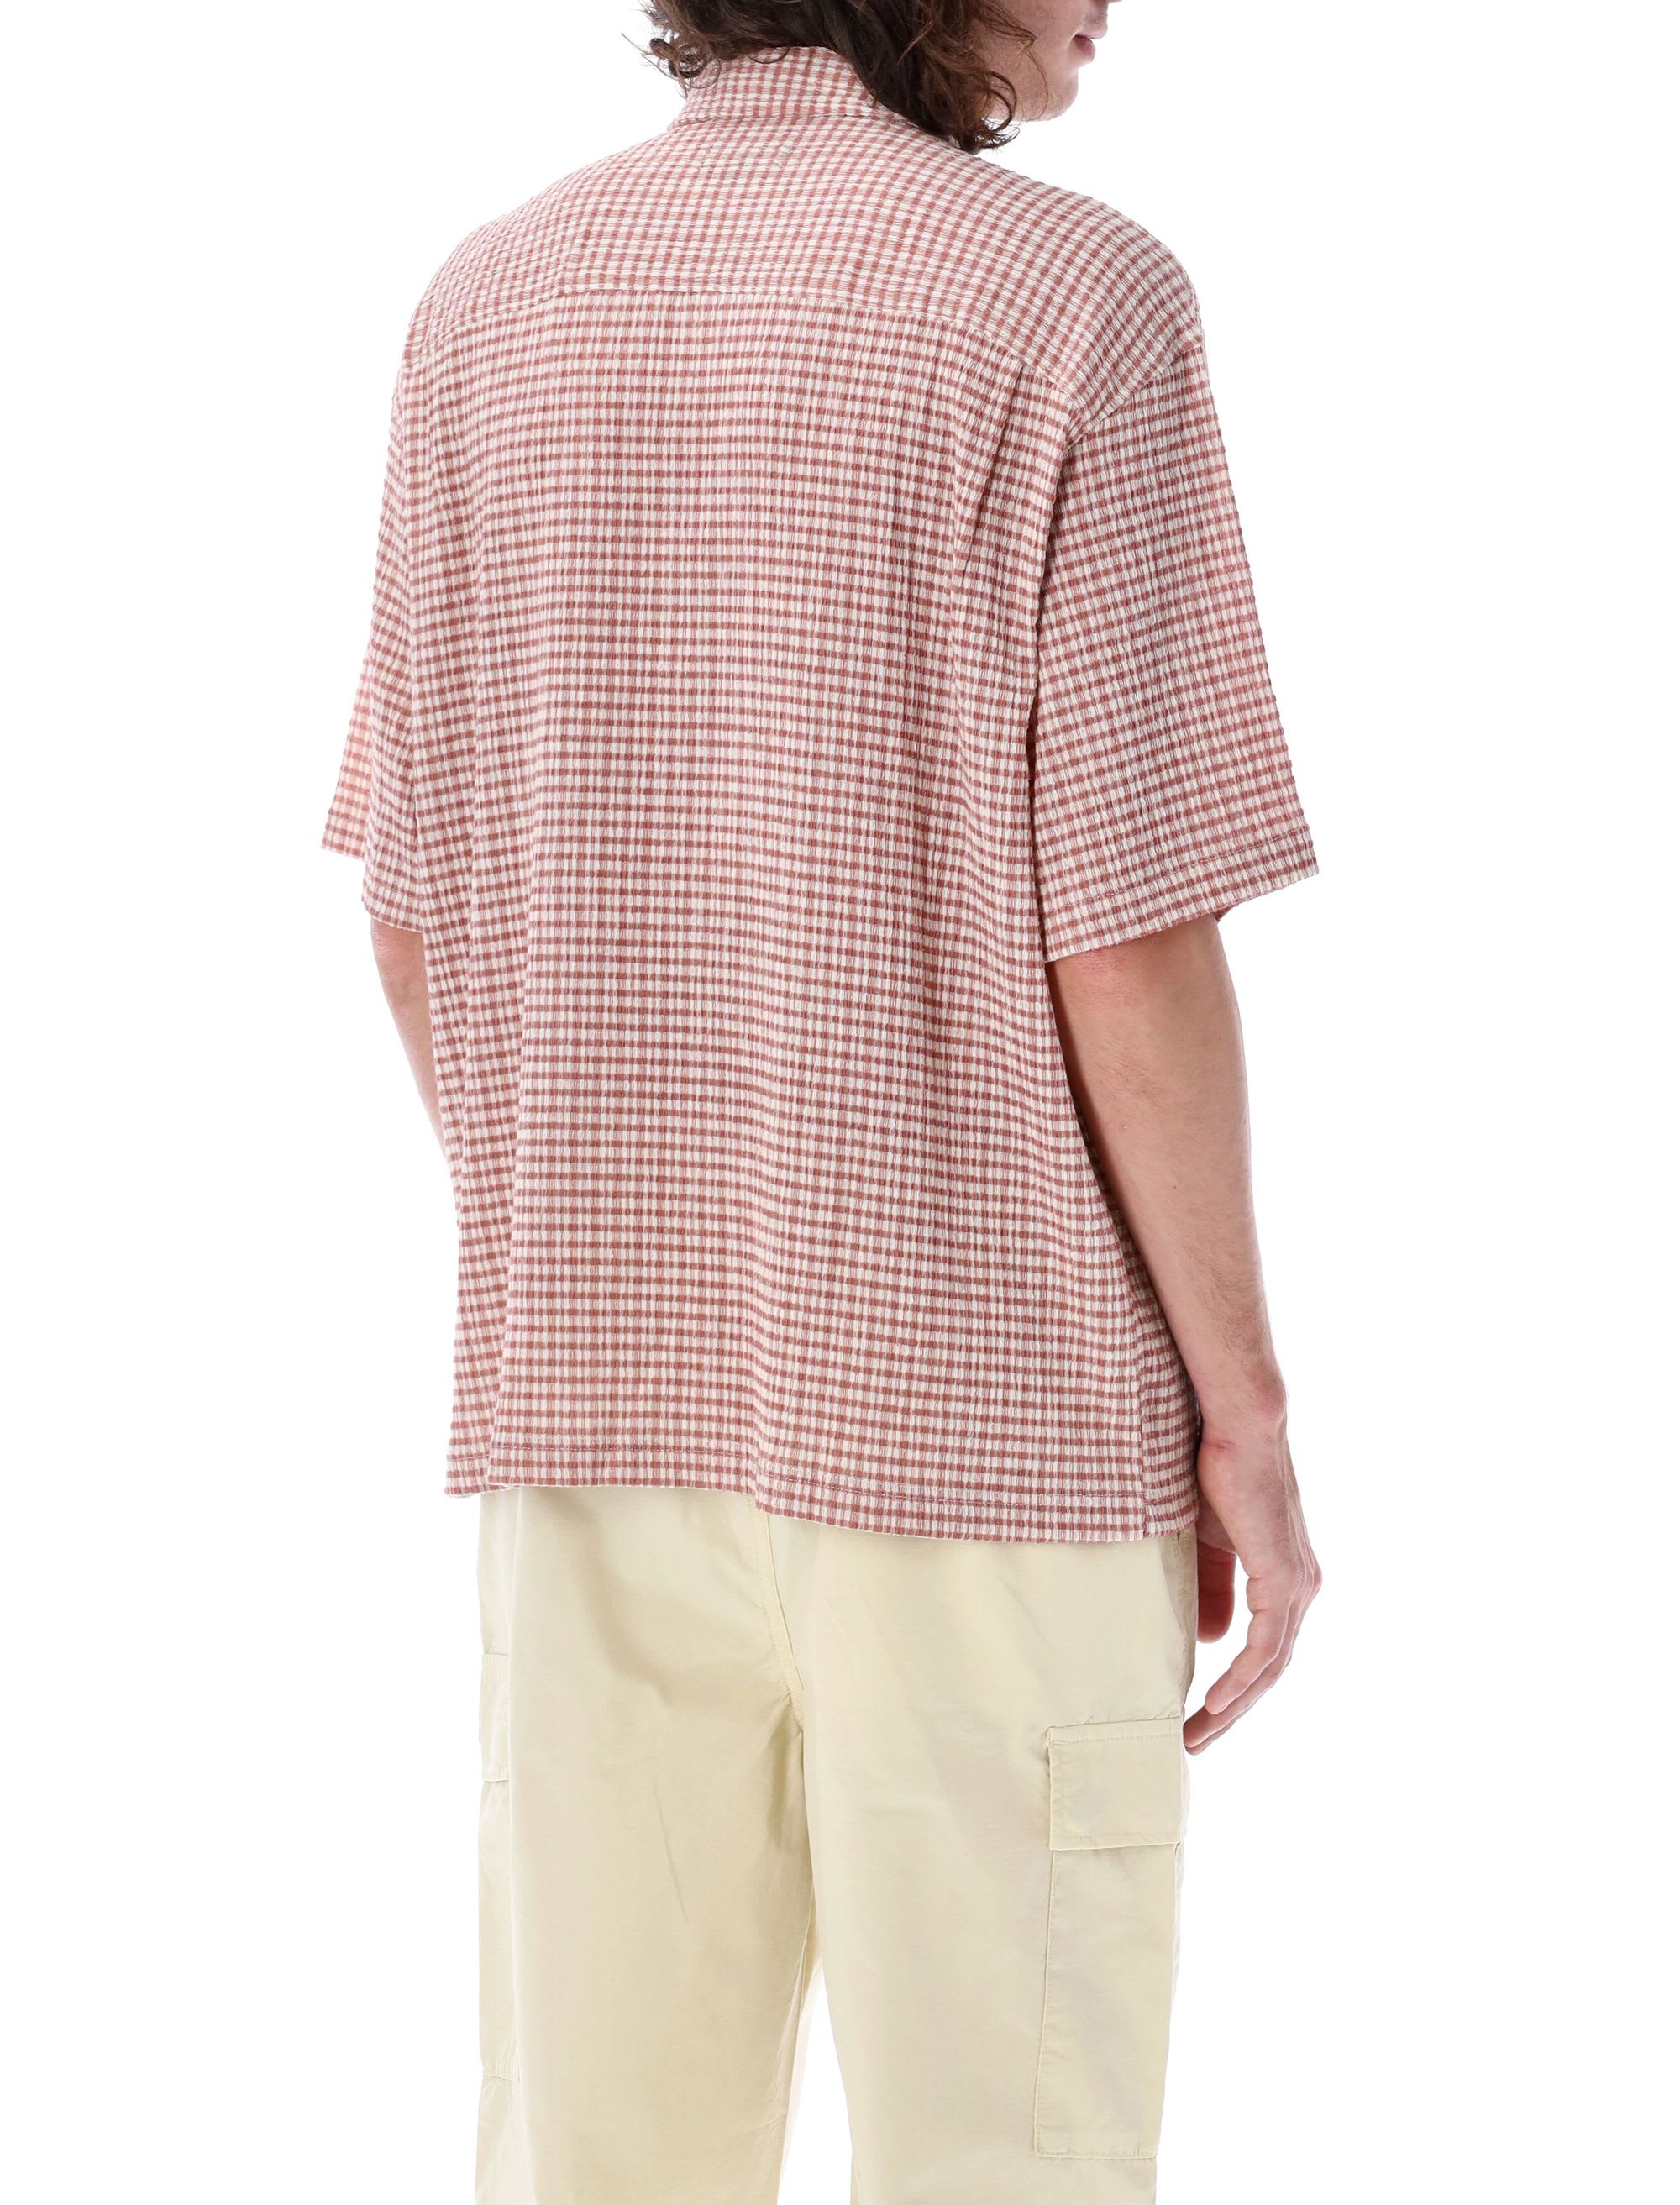 stussy 23ss WRINKLY GINGHAM SS SHIRT - シャツ